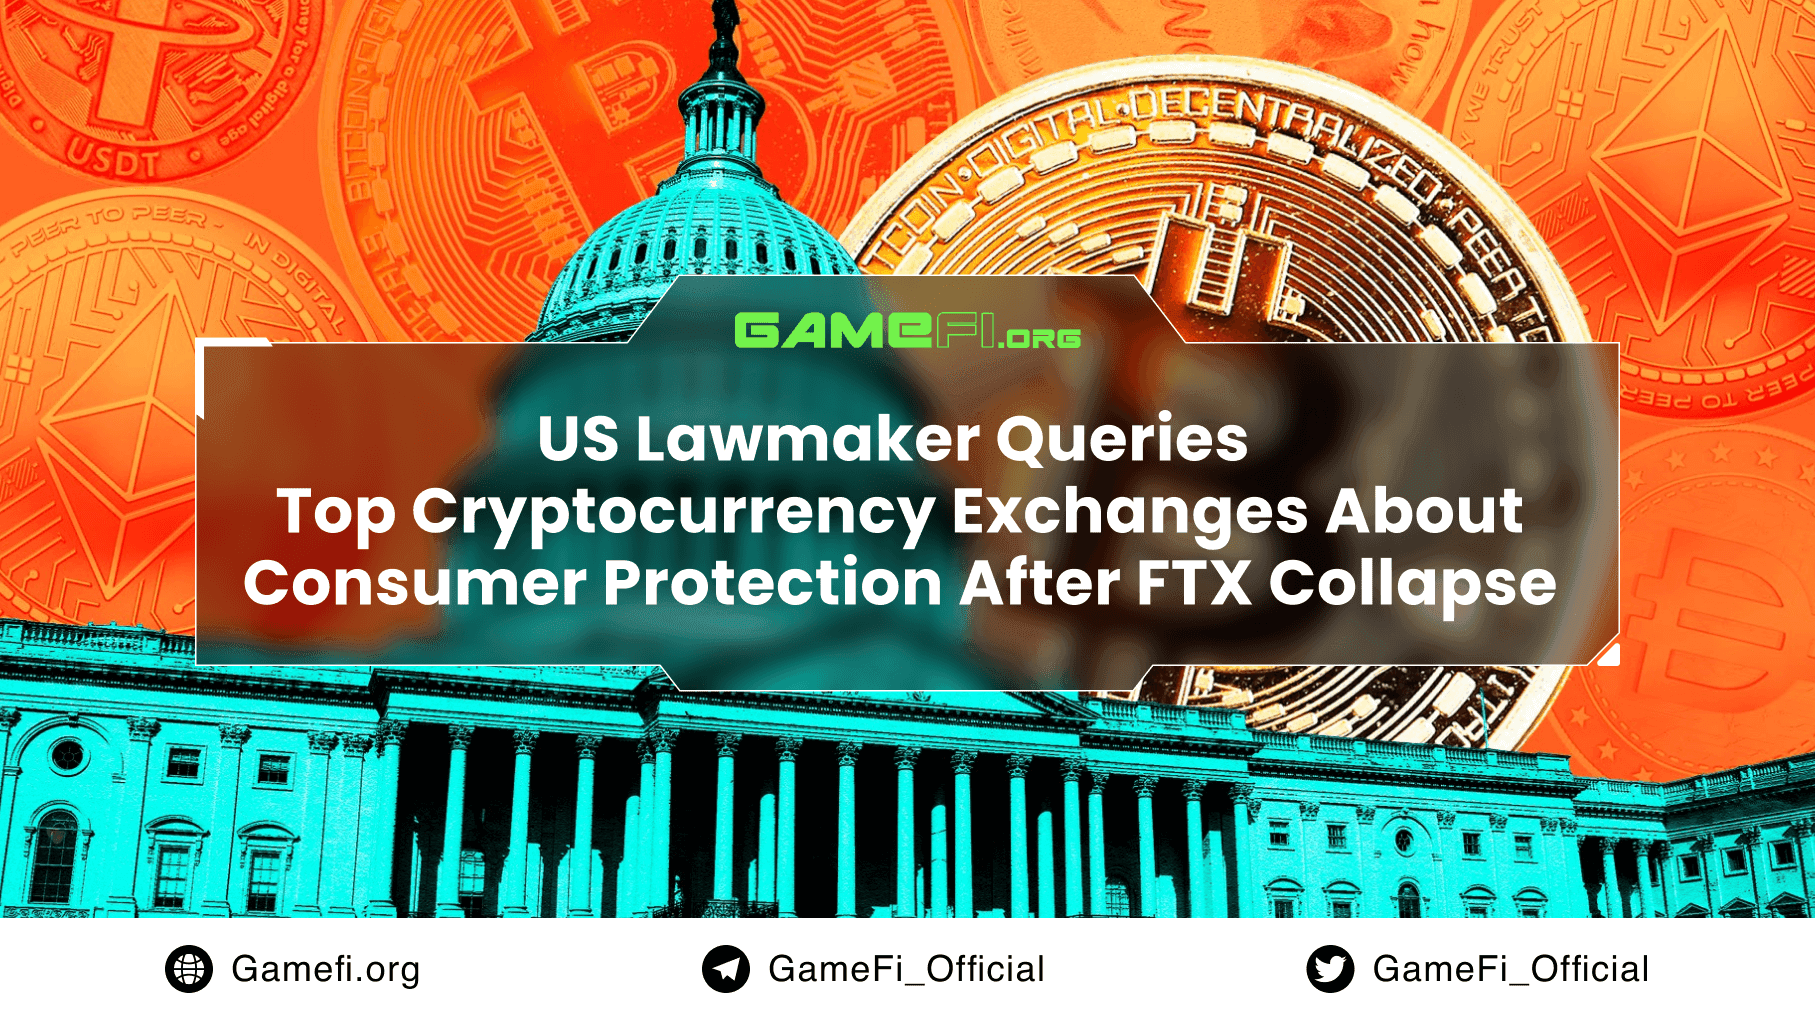 US Lawmaker Queries Top Cryptocurrency Exchanges About Consumer Protection After FTX Collapse